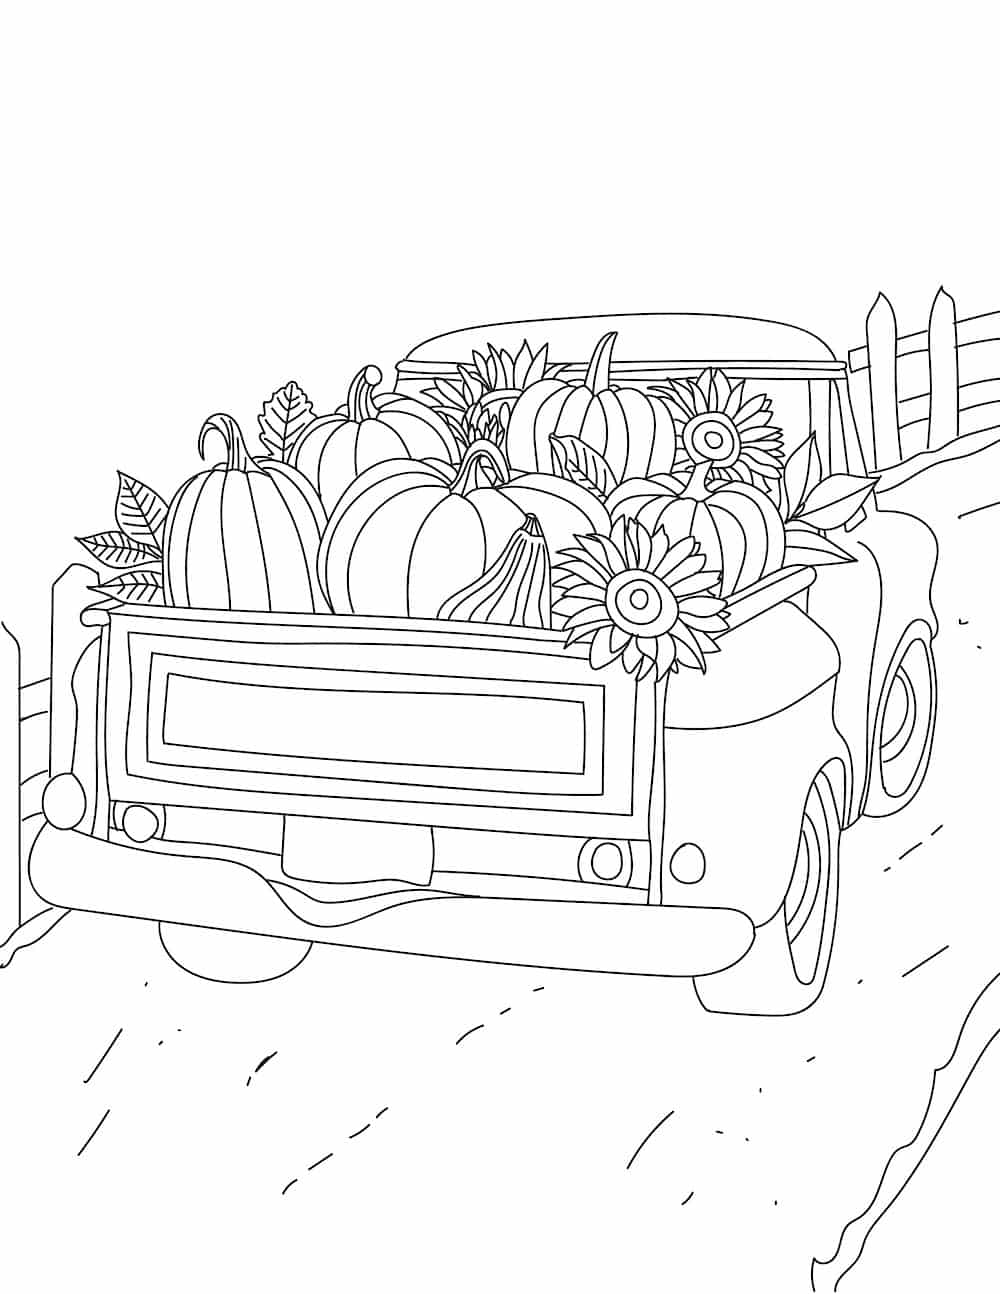 Printable easy fall coloring pages for adults